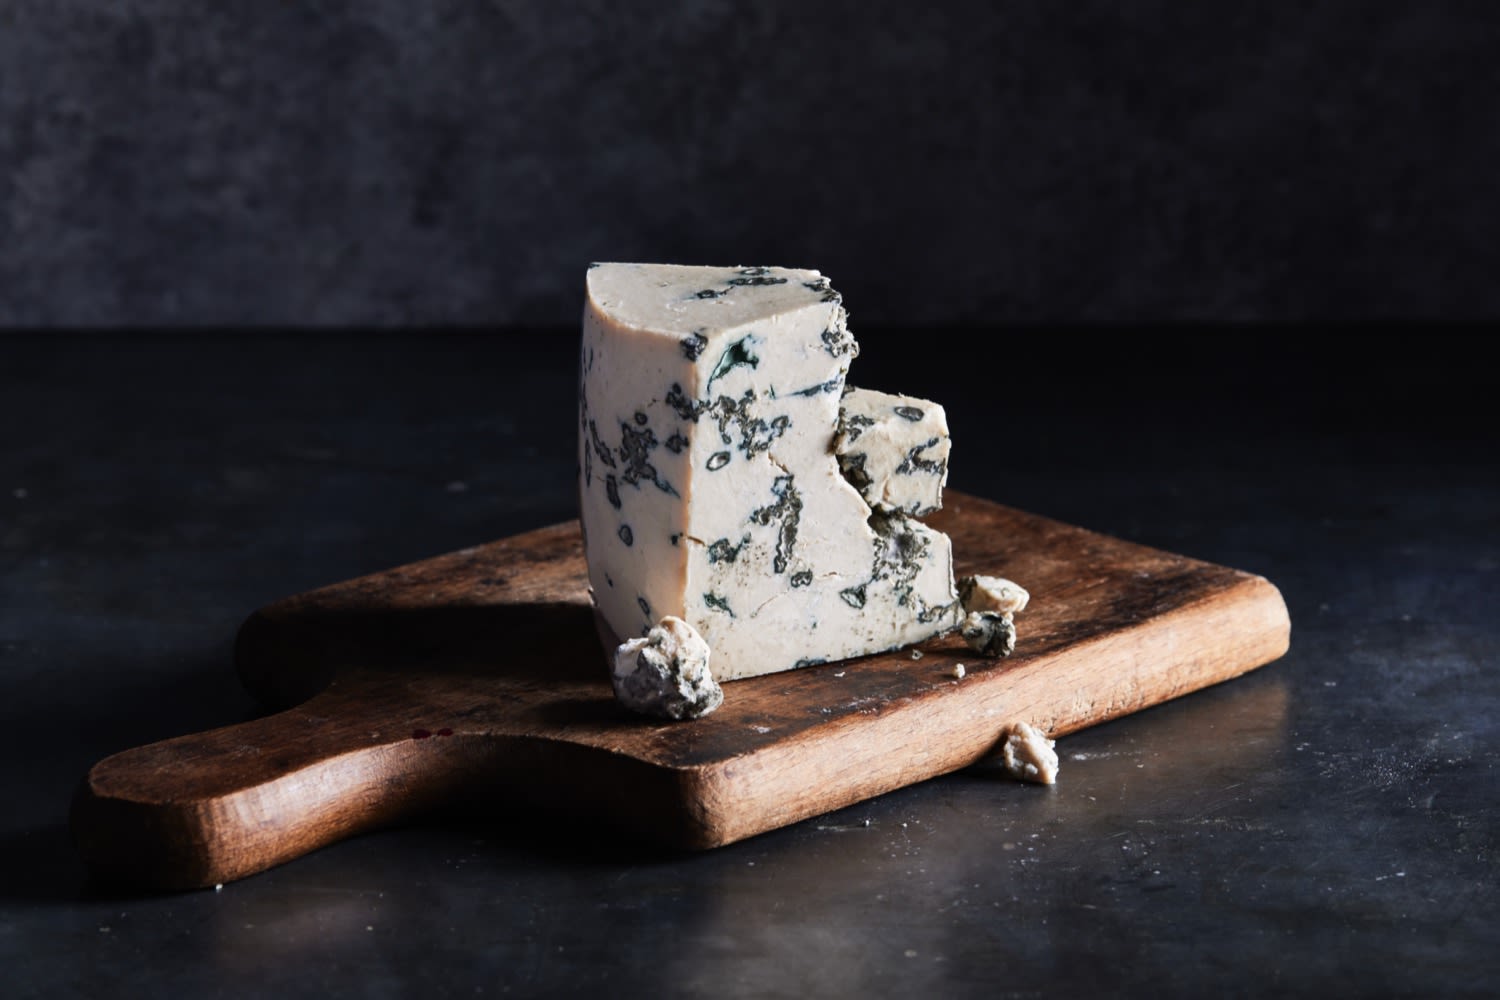 After a vegan blue cheese won the Good Food Award, panicked dairy cheese makers forced the foundation to disqualify it